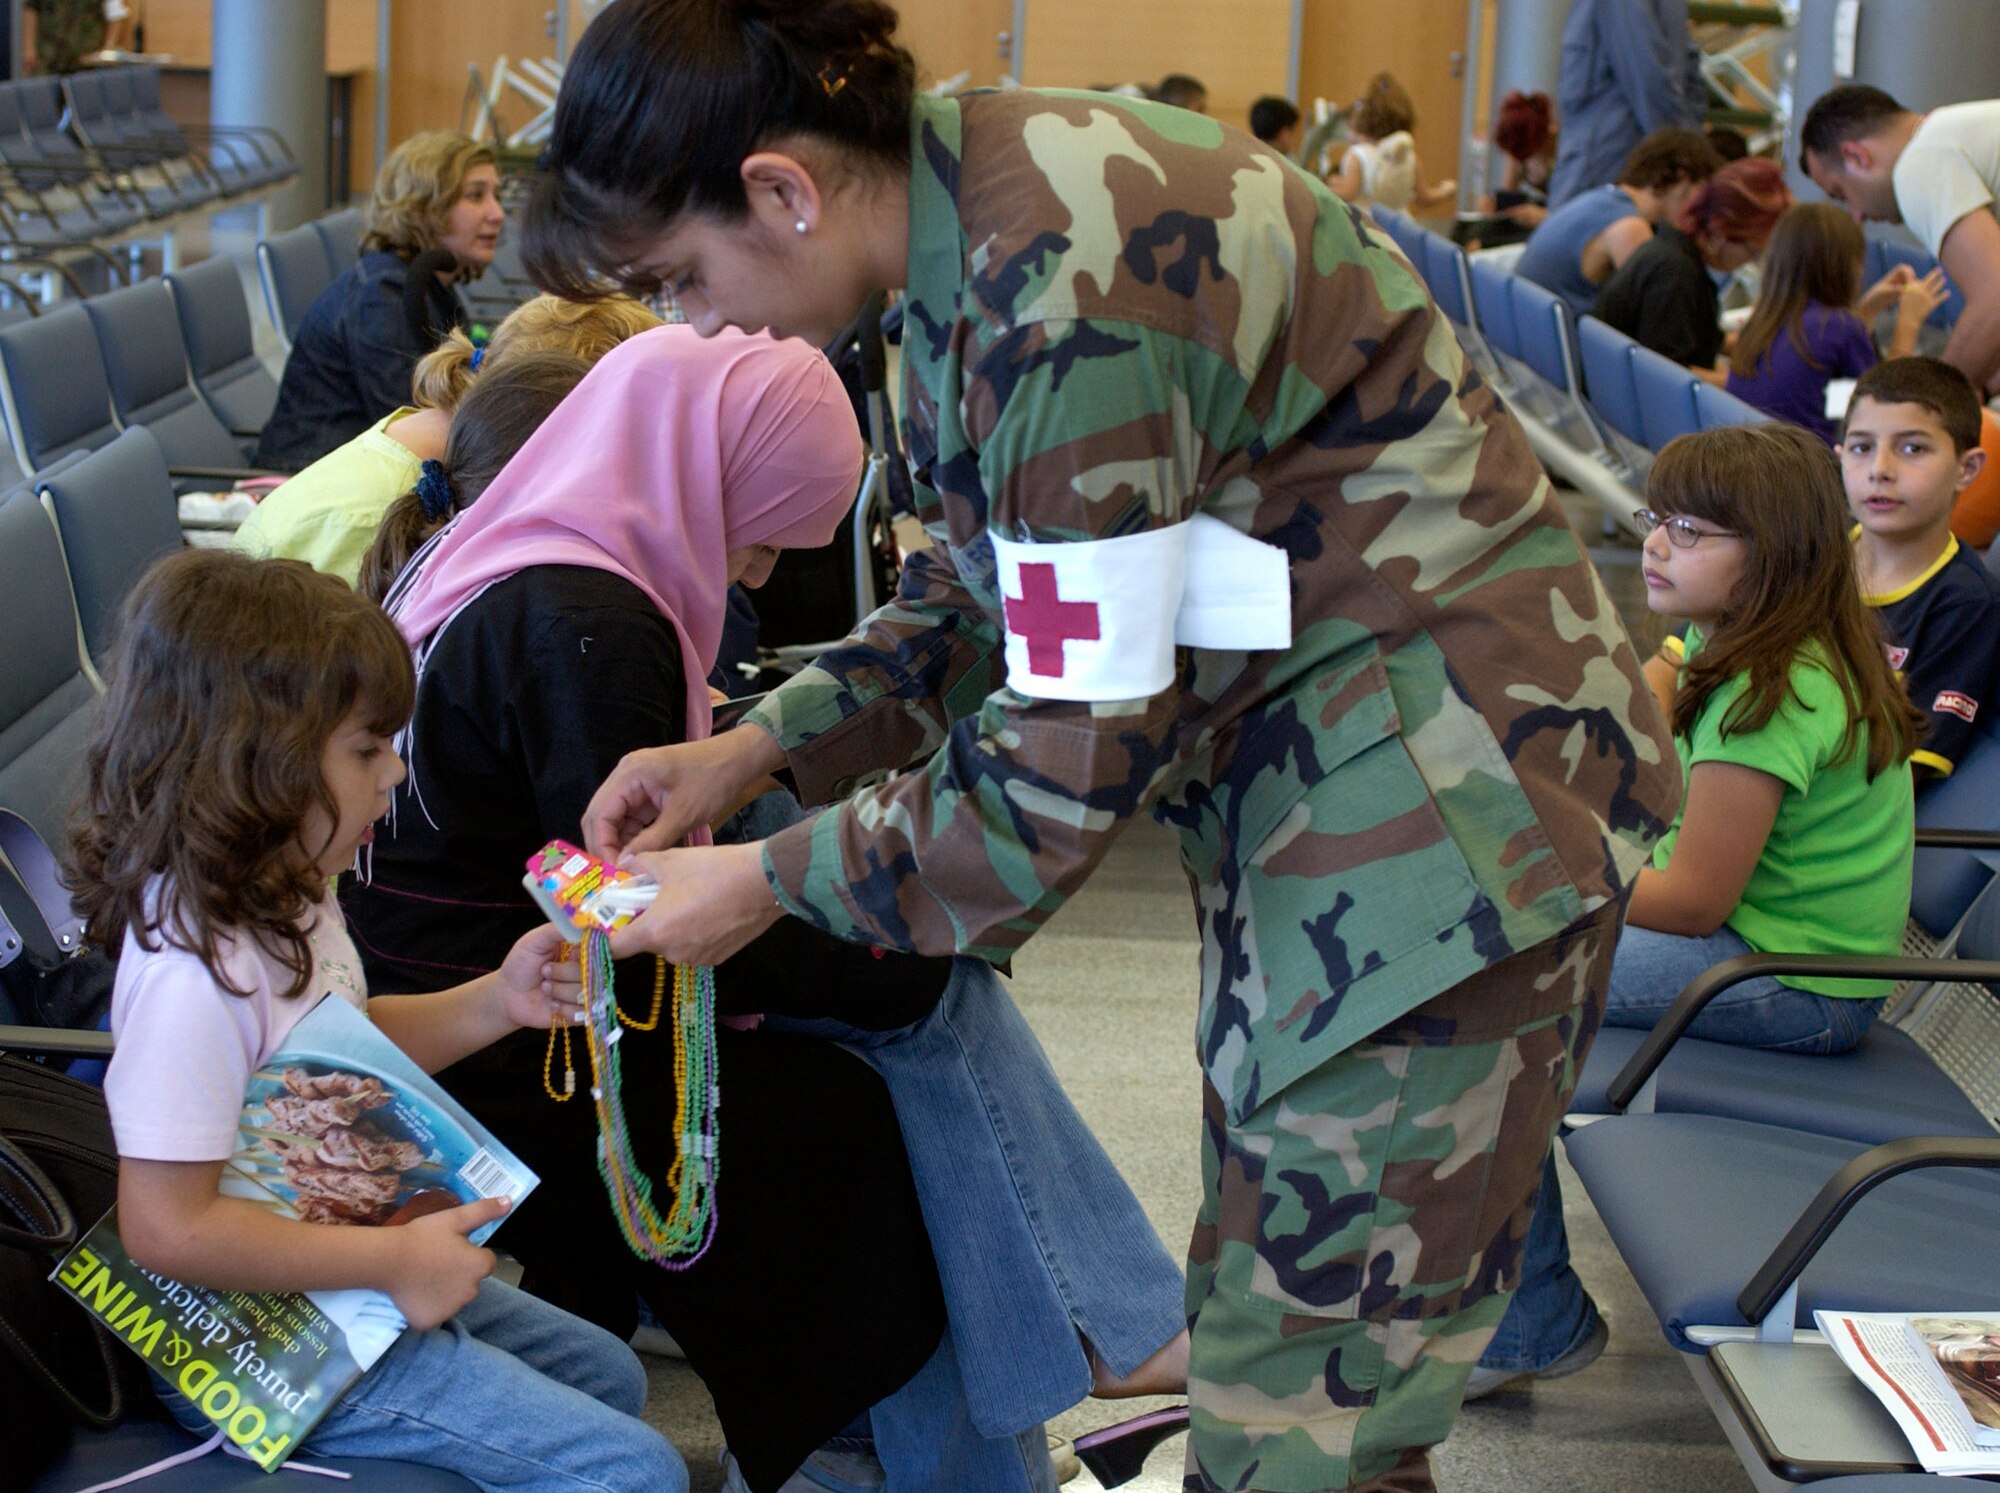 Tech. Sgt. Monica Snyder distributes candy and toys to children at the passenger terminal at Ramstein Air Base, Germany, on July 23. Airmen at Ramstein provided humanitarian assistance for American citizens departing the Lebanon crisis on their way to the United States. Sergeant Snyder is with the 435th Medical Group. (U.S. Air Force photo/Staff Sgt. Angela B. Malek)